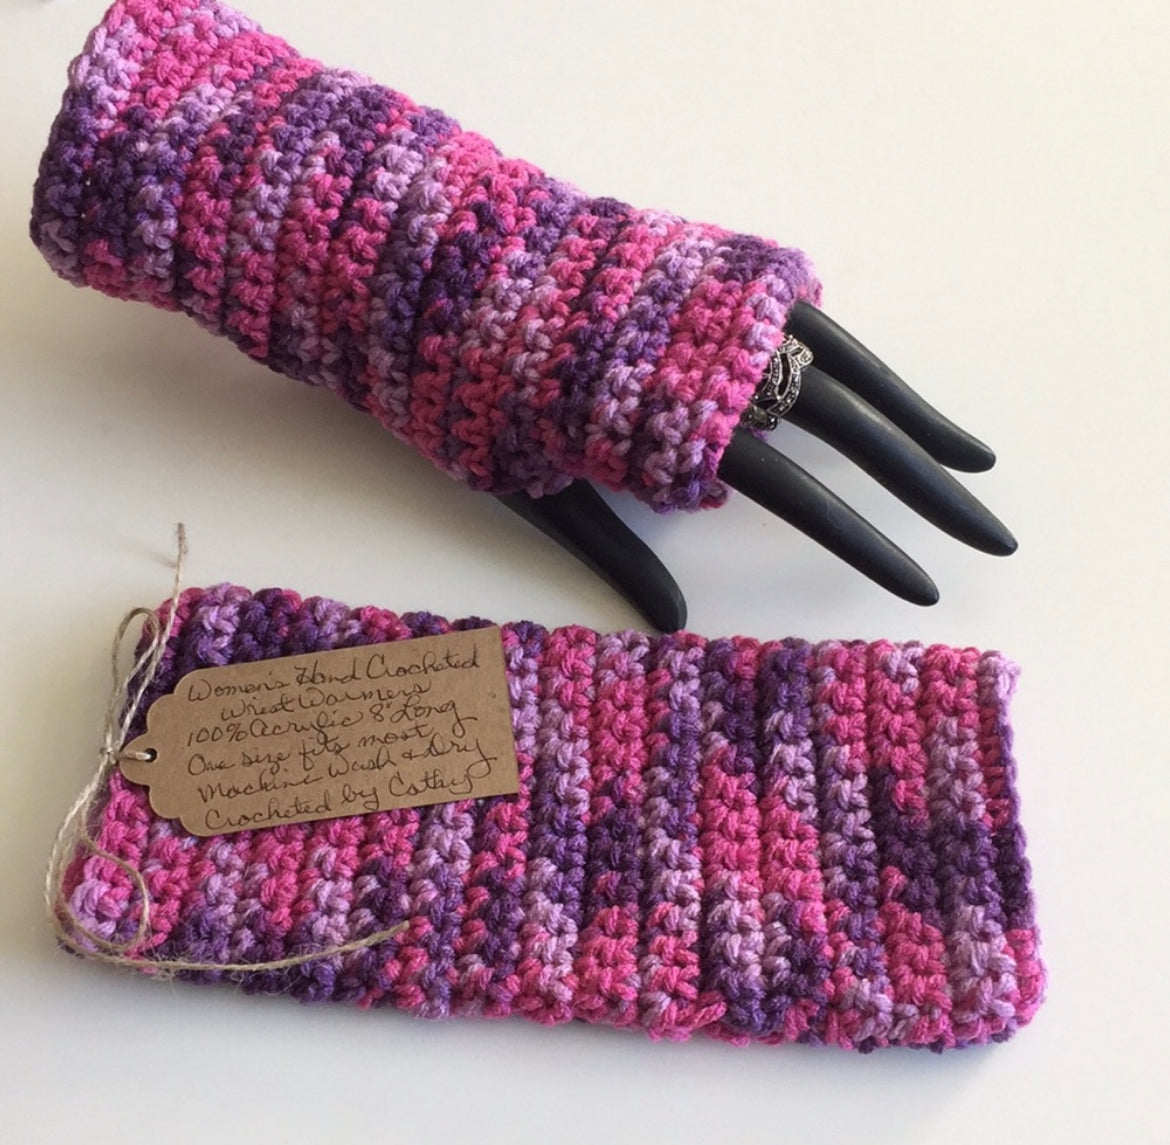 Writing Tech Fingerless Gloves Marbled Pink Purple Crochet Knit Fall Winter Gaming Texting Wrist Warmers